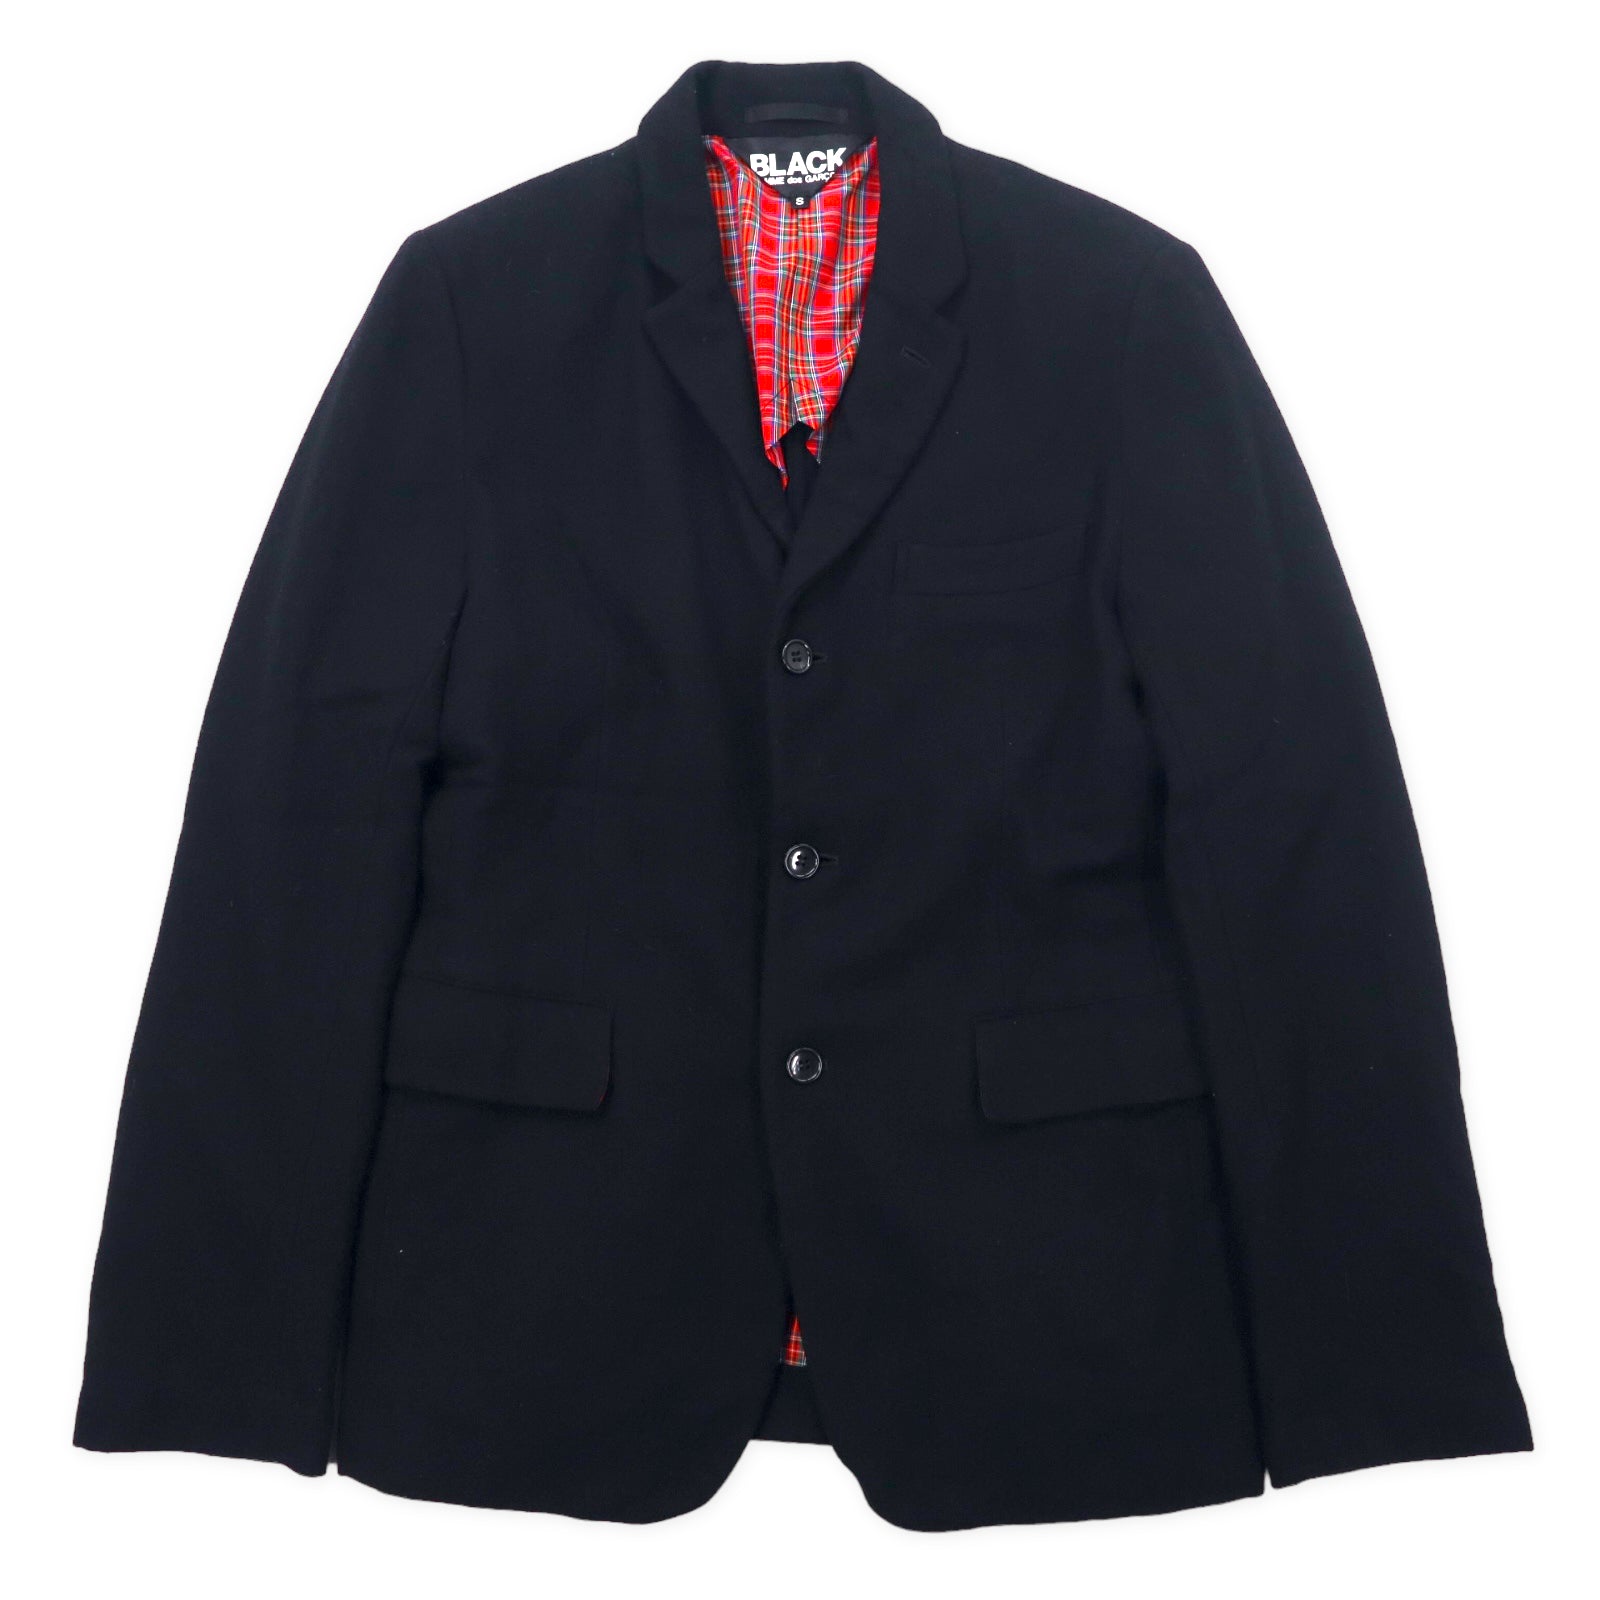 BLACK COMME des GARCONS 3B Tailored Jacket S Black Wool Lining ...